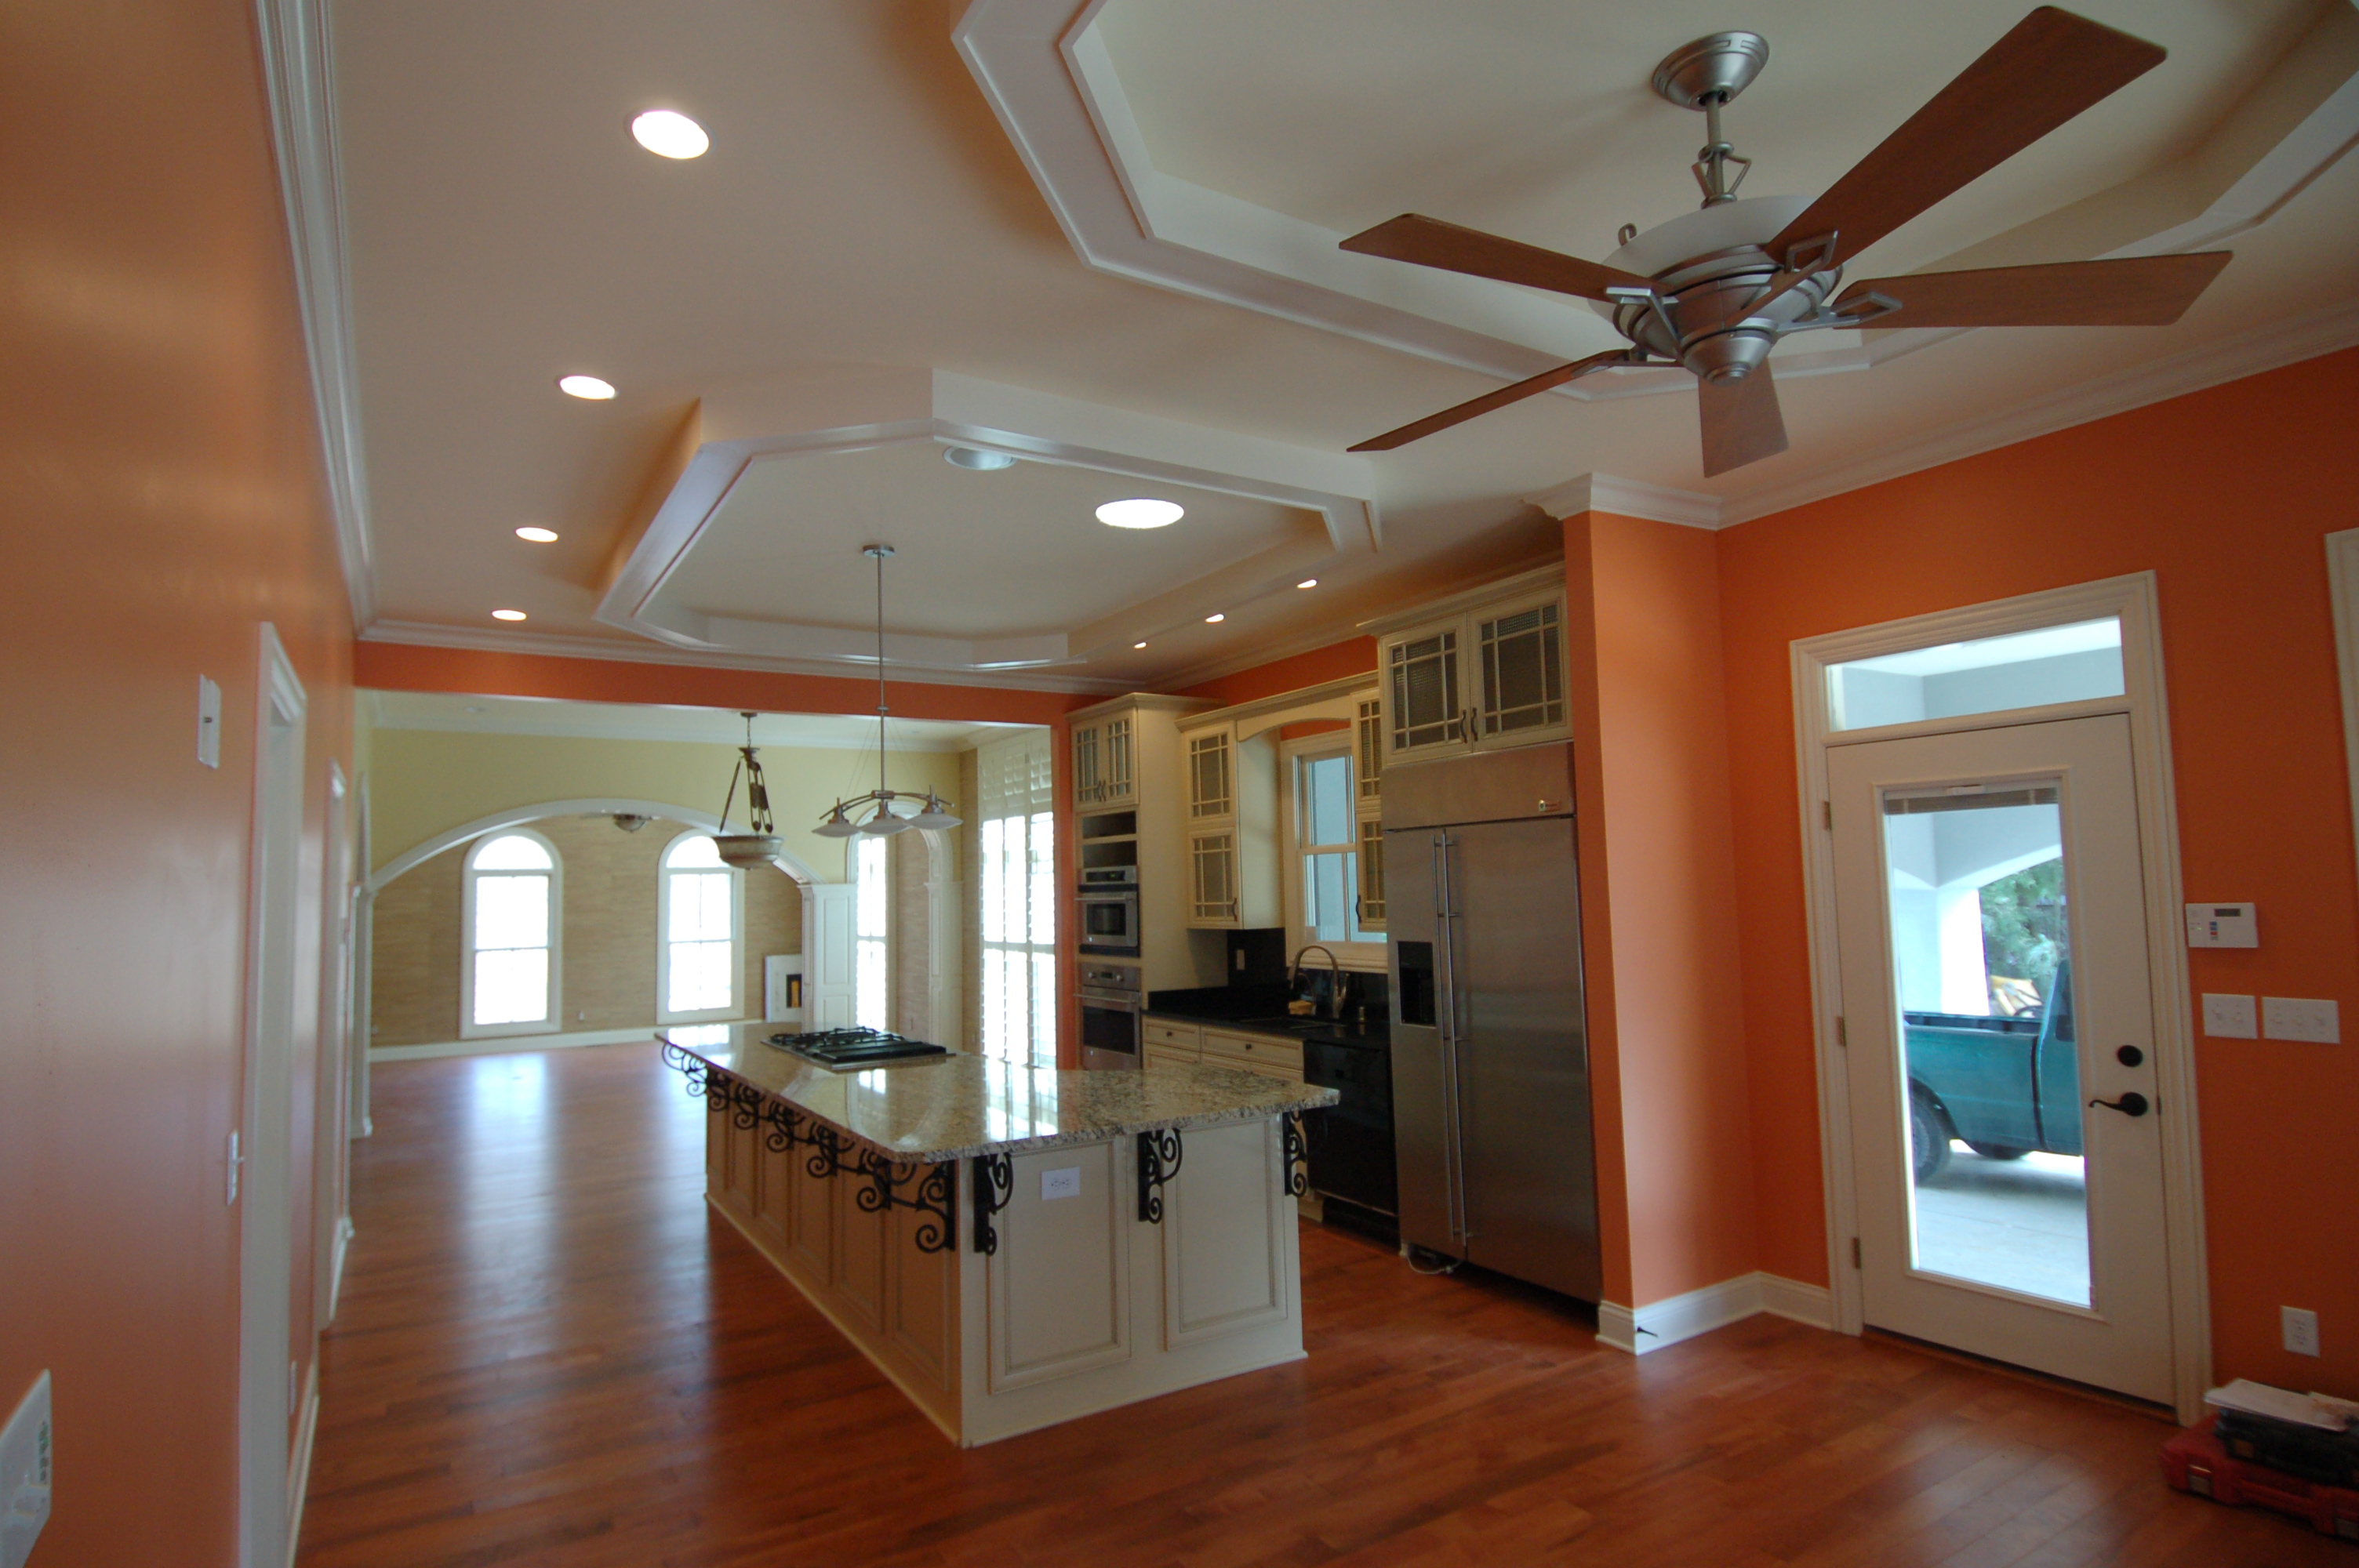 Cary Painters 919 422 0595 Best Professional Interior